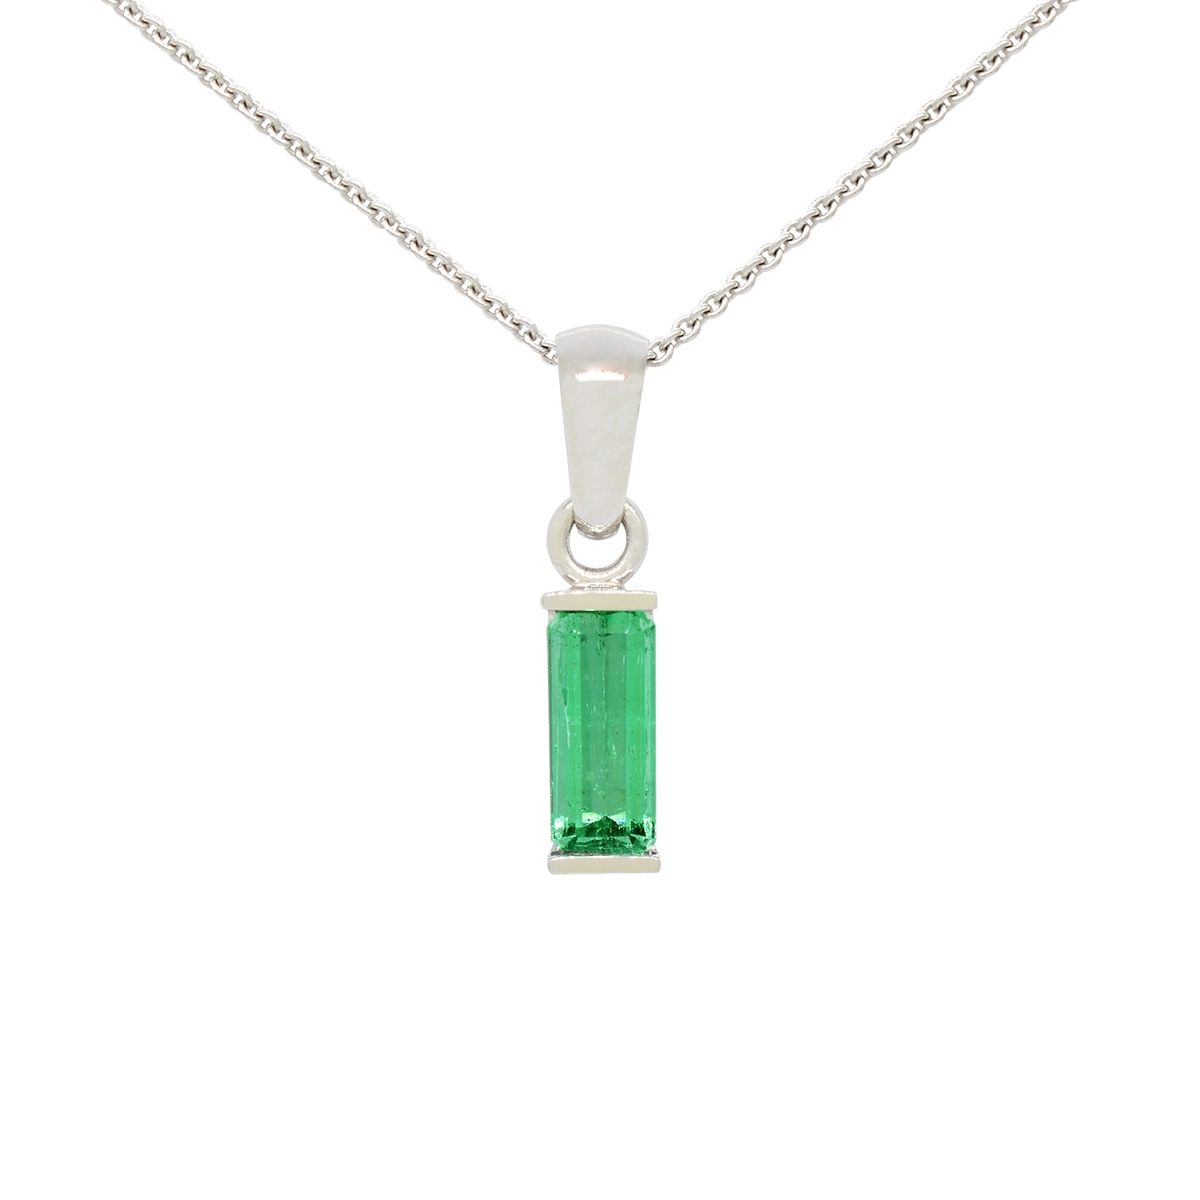 Emerald cut emerald pendant necklace in 18K white gold half-bezel setting with gold bars at top and bottom